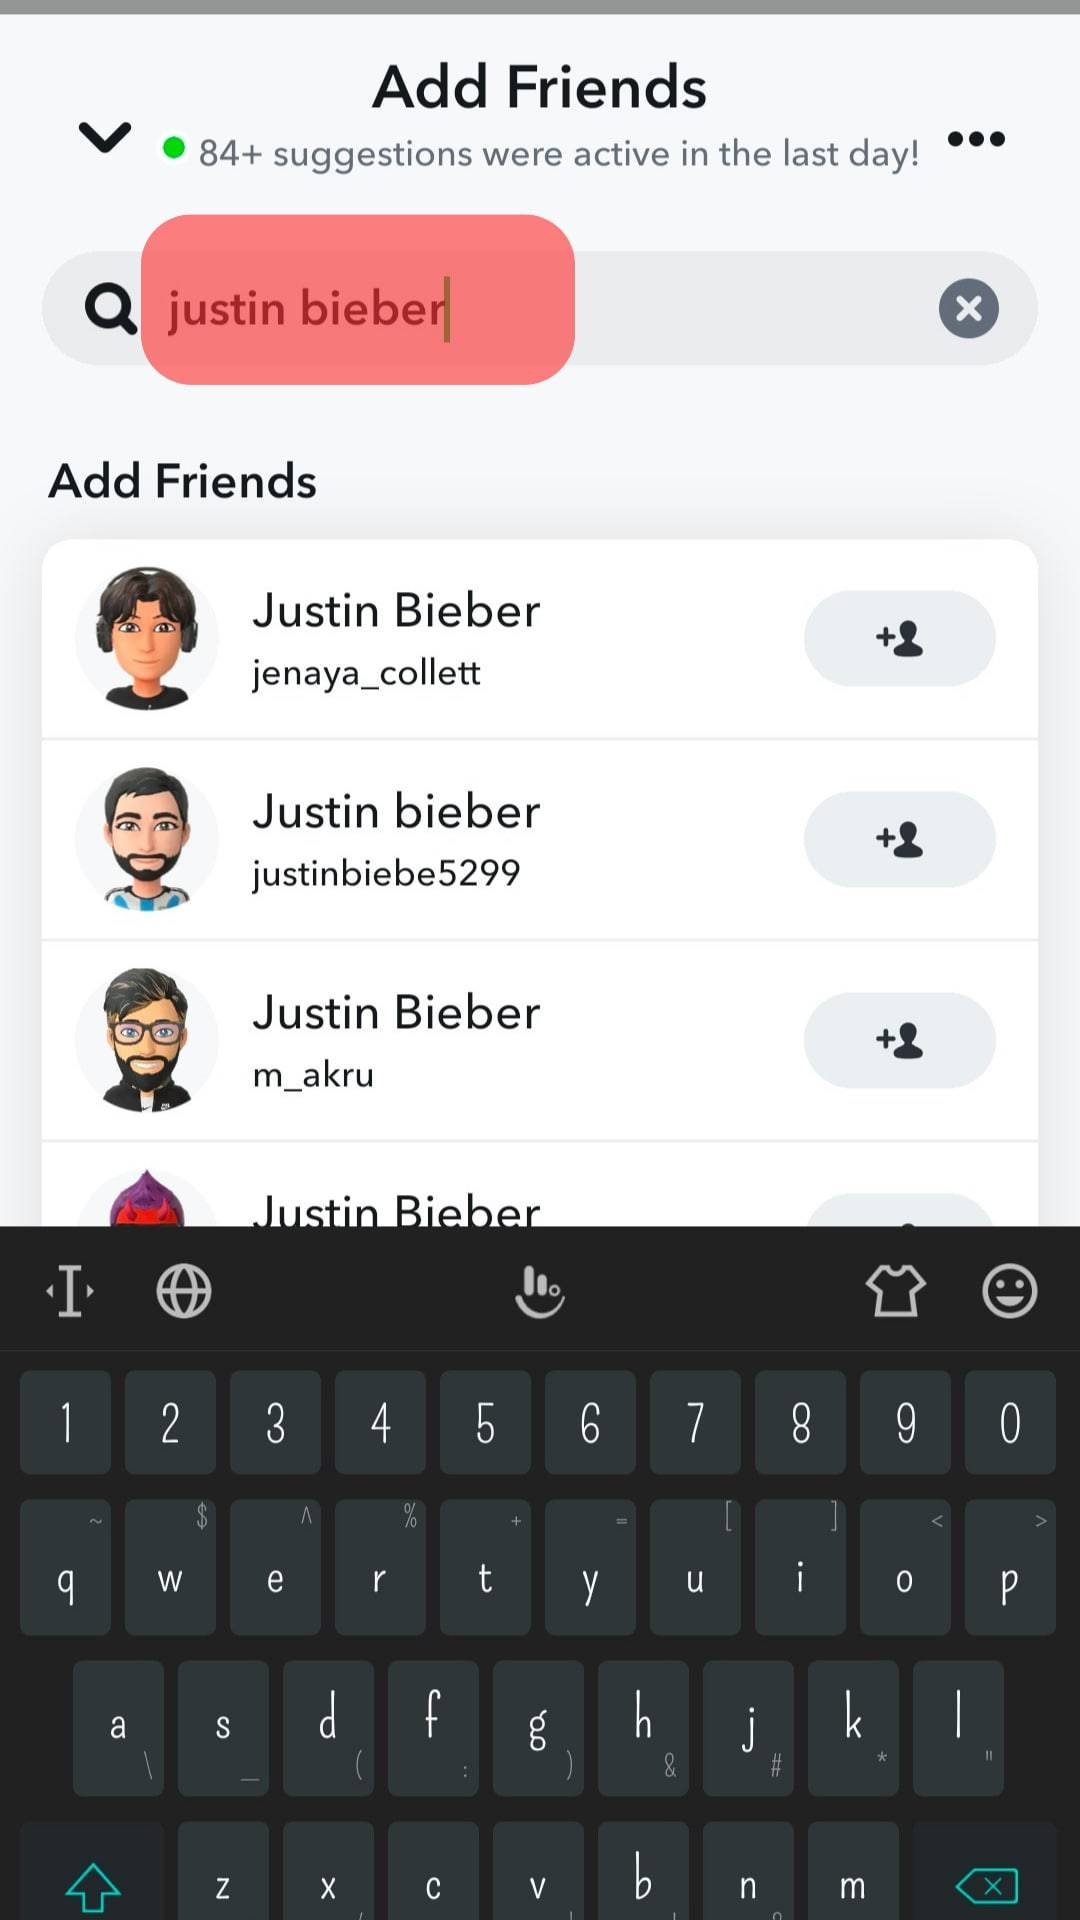 Go To Add Friends And Type The Username